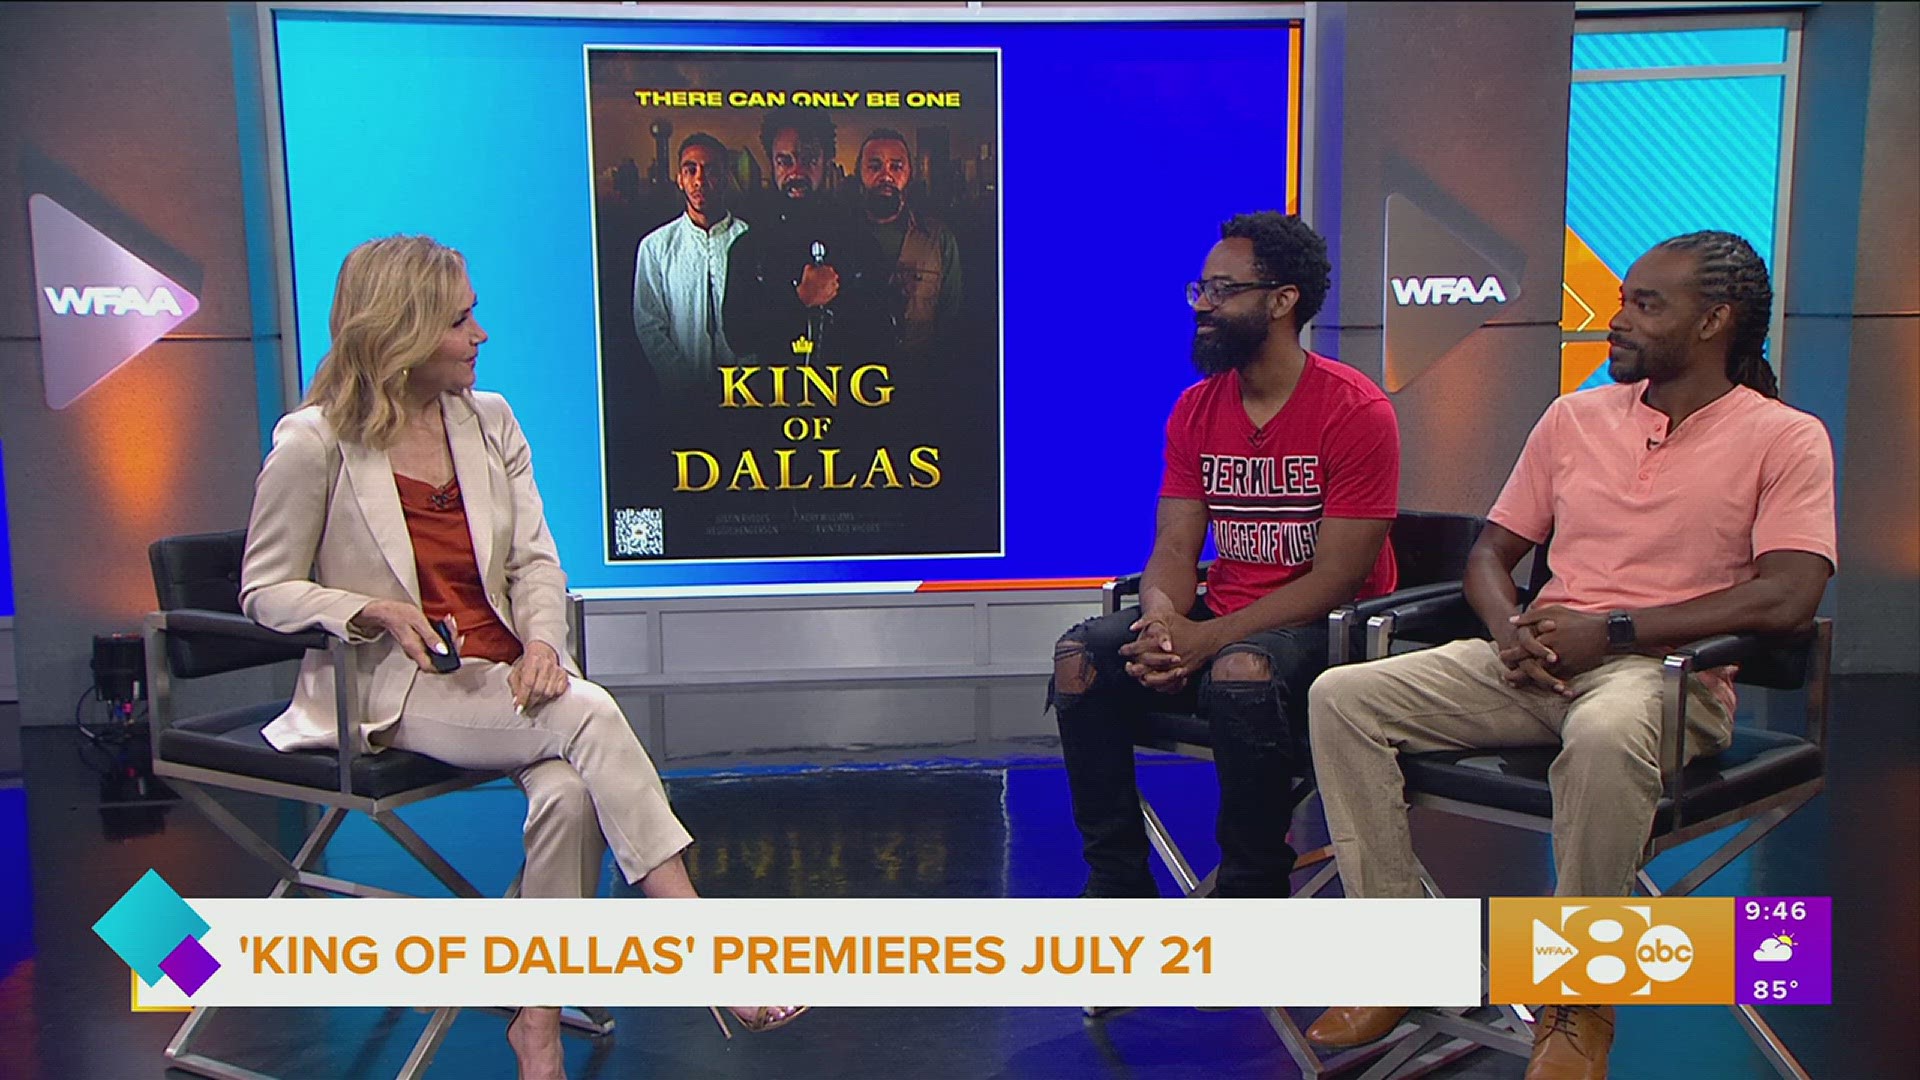 Dallas-based filmmakers Kory Williams and Jay Rhodes are back in their artistic genius with a film called "King of Dallas."